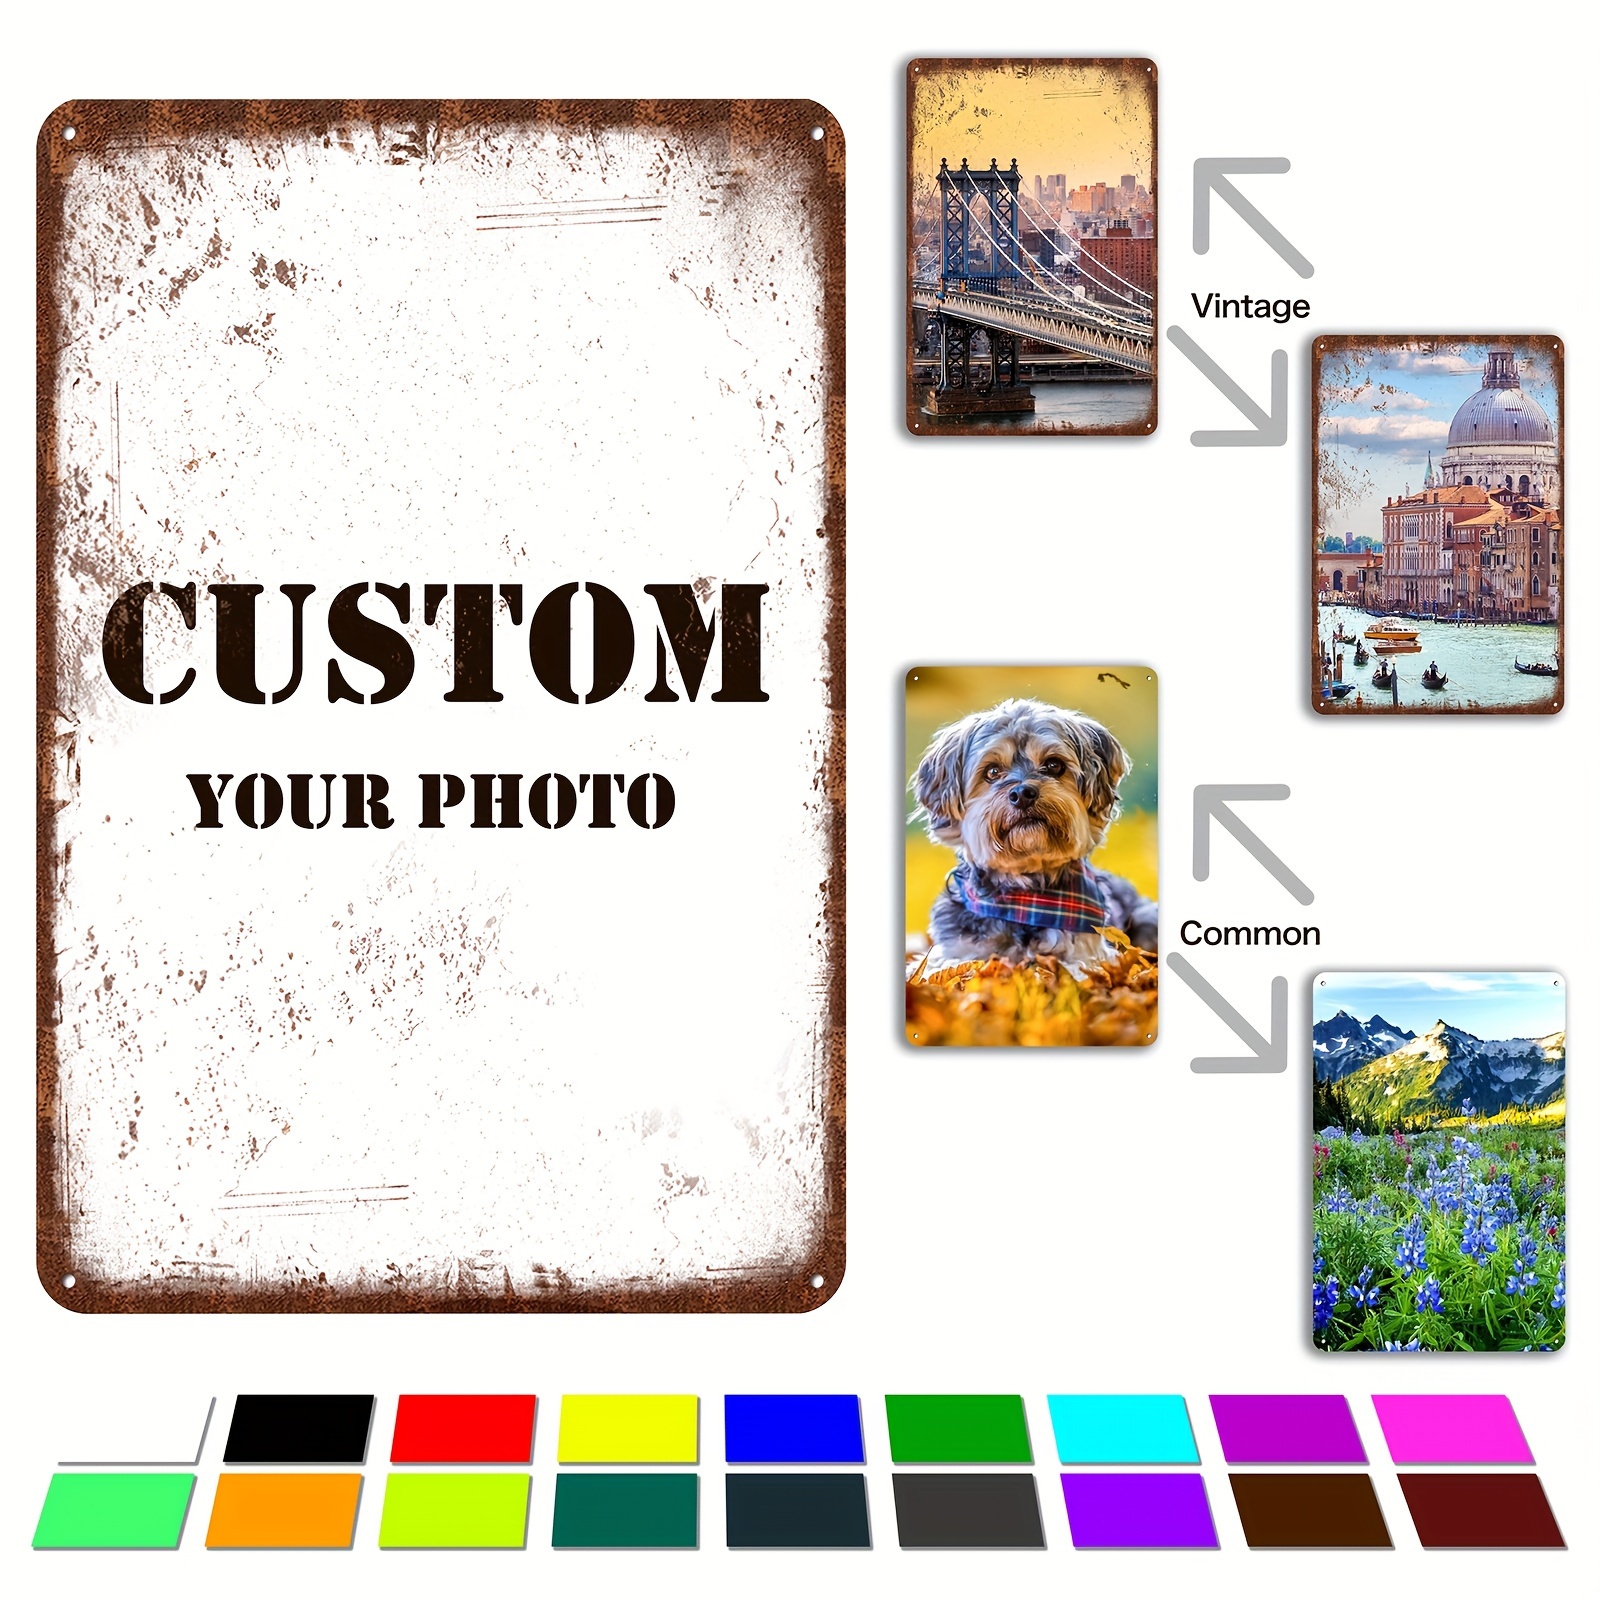 

1pc Personalized Photo Customization, Add Your Favorite Photos, Metal Prints As Picture Gifts For Family, Loved Ones, And Pets